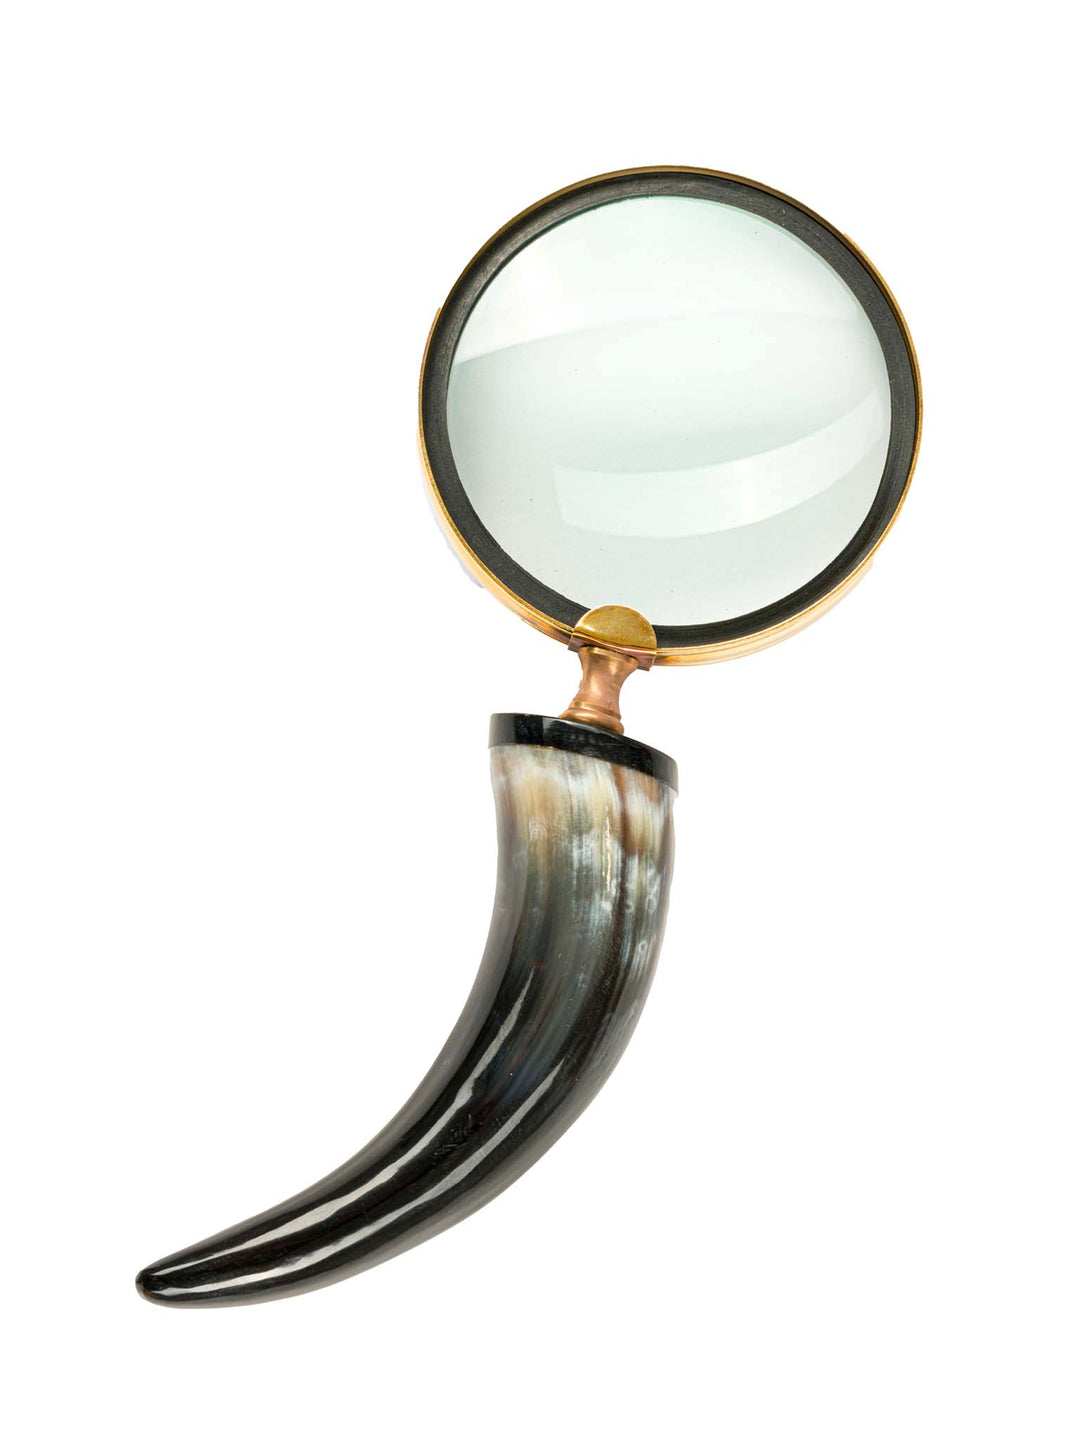 Decorative magnifying glass - horn handle 